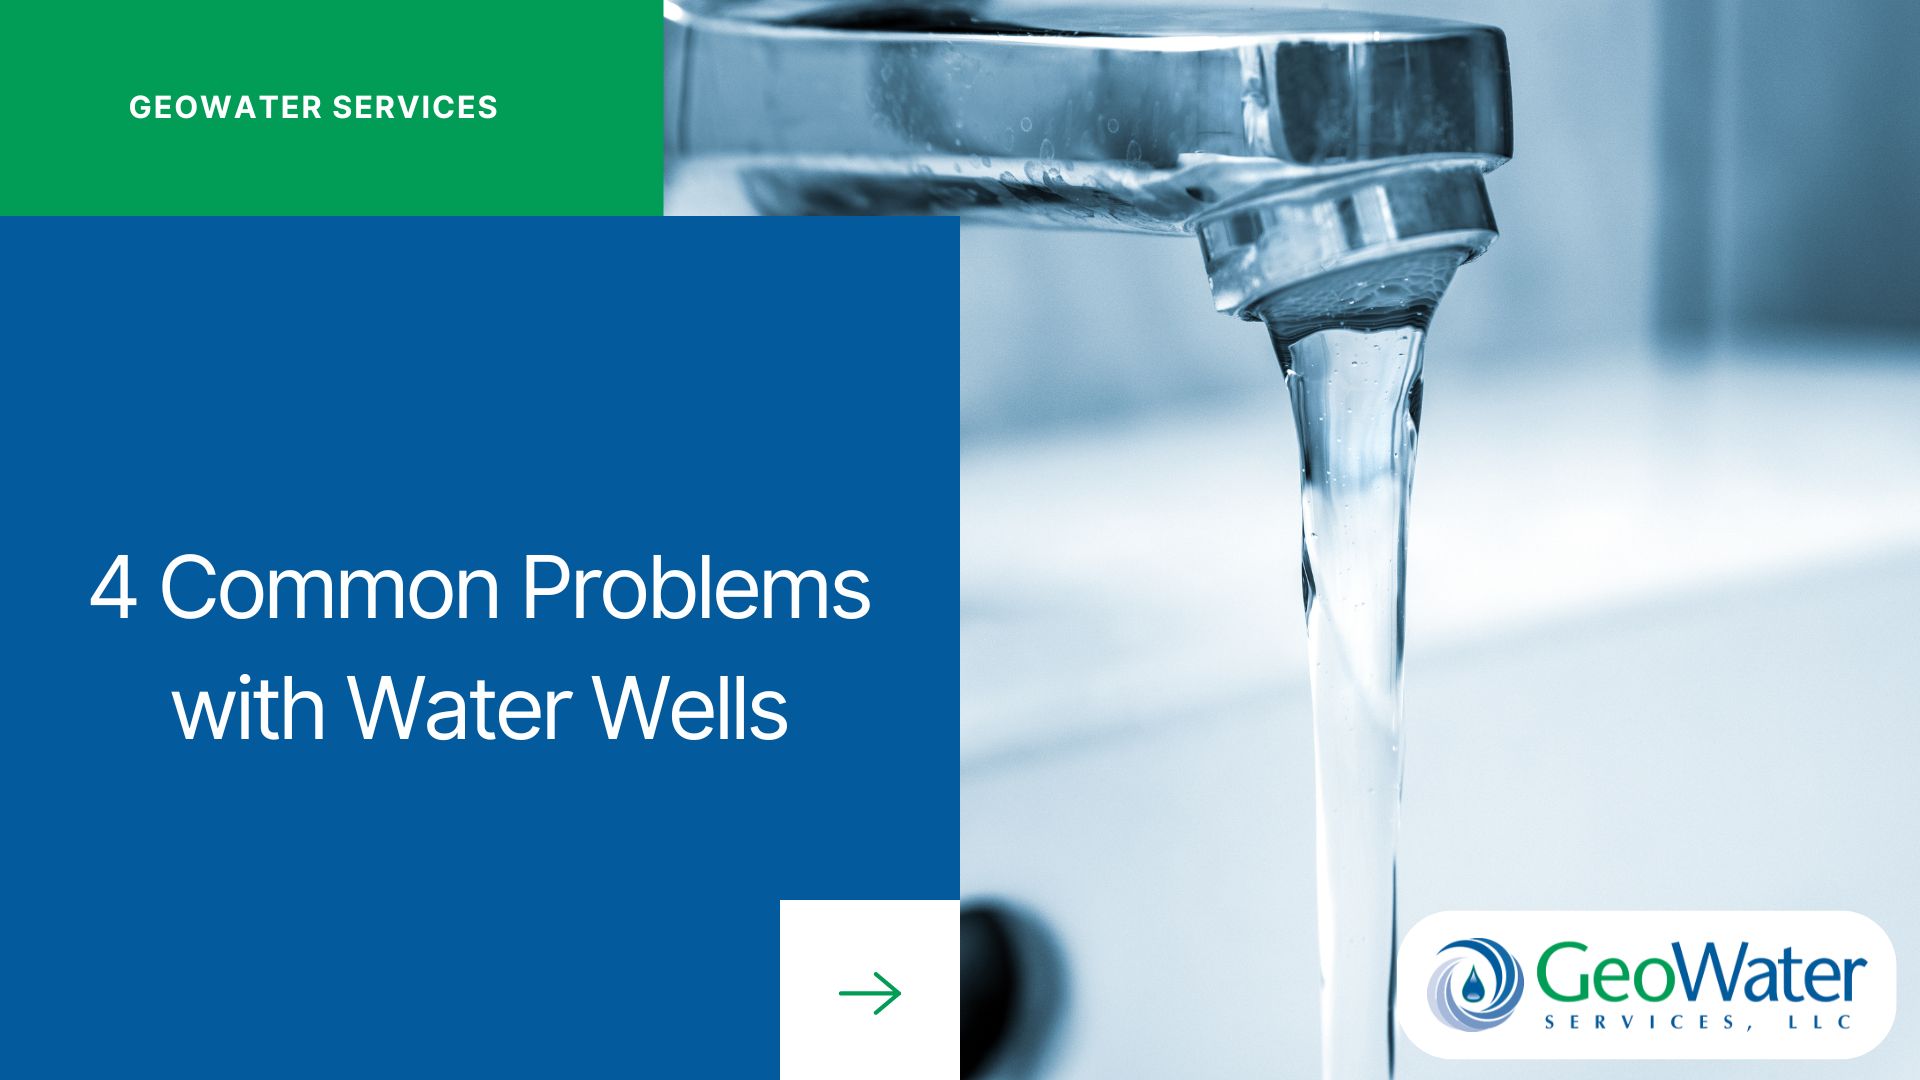 4 Common Problems with Water Wells